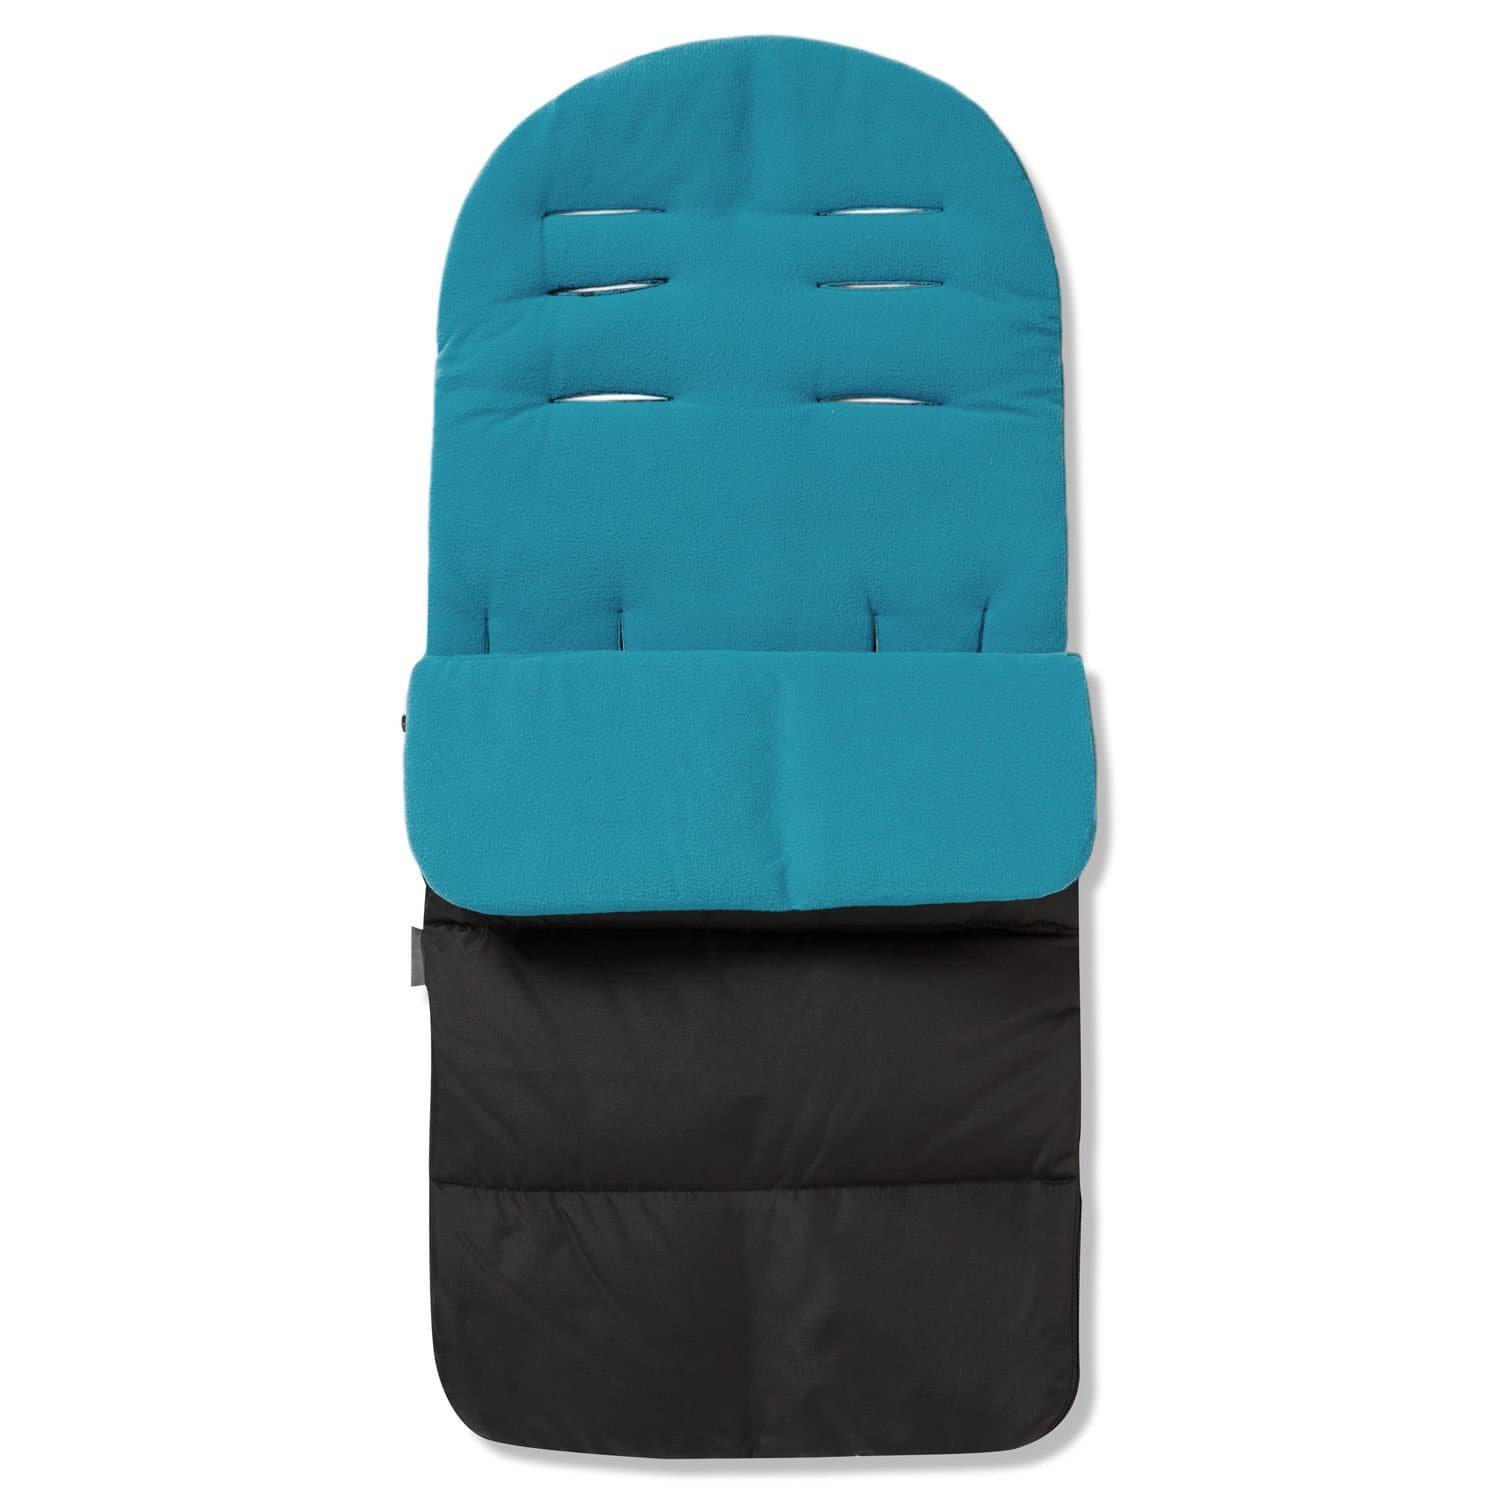 Premium Footmuff / Cosy Toes Compatible with Red Kite - Ocean Blue / Fits All Models | For Your Little One